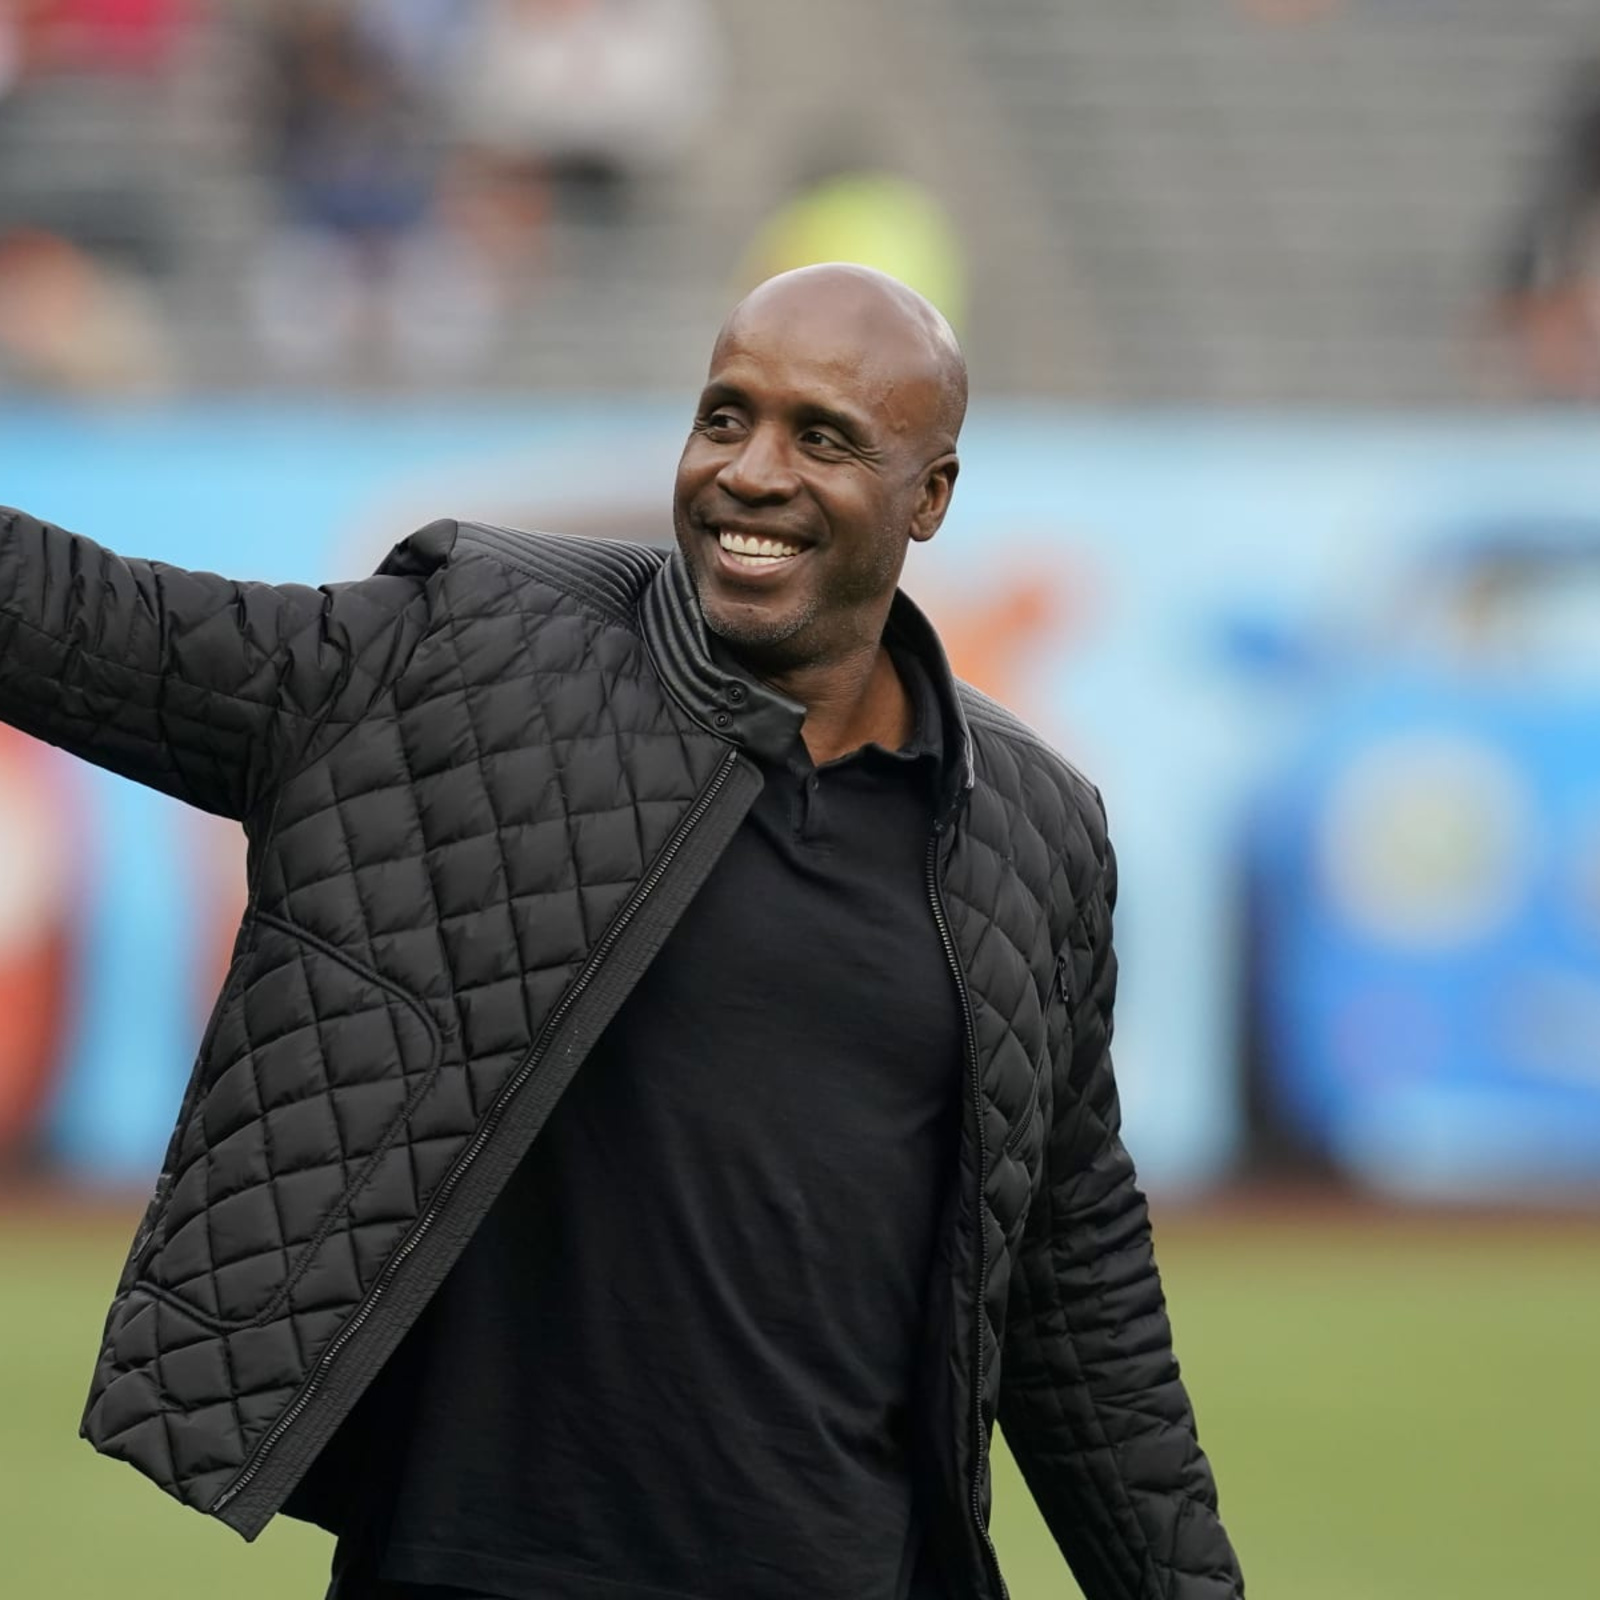 Barry Bonds Pleads Hall of Fame Case, Says He's Been 'Vindicated